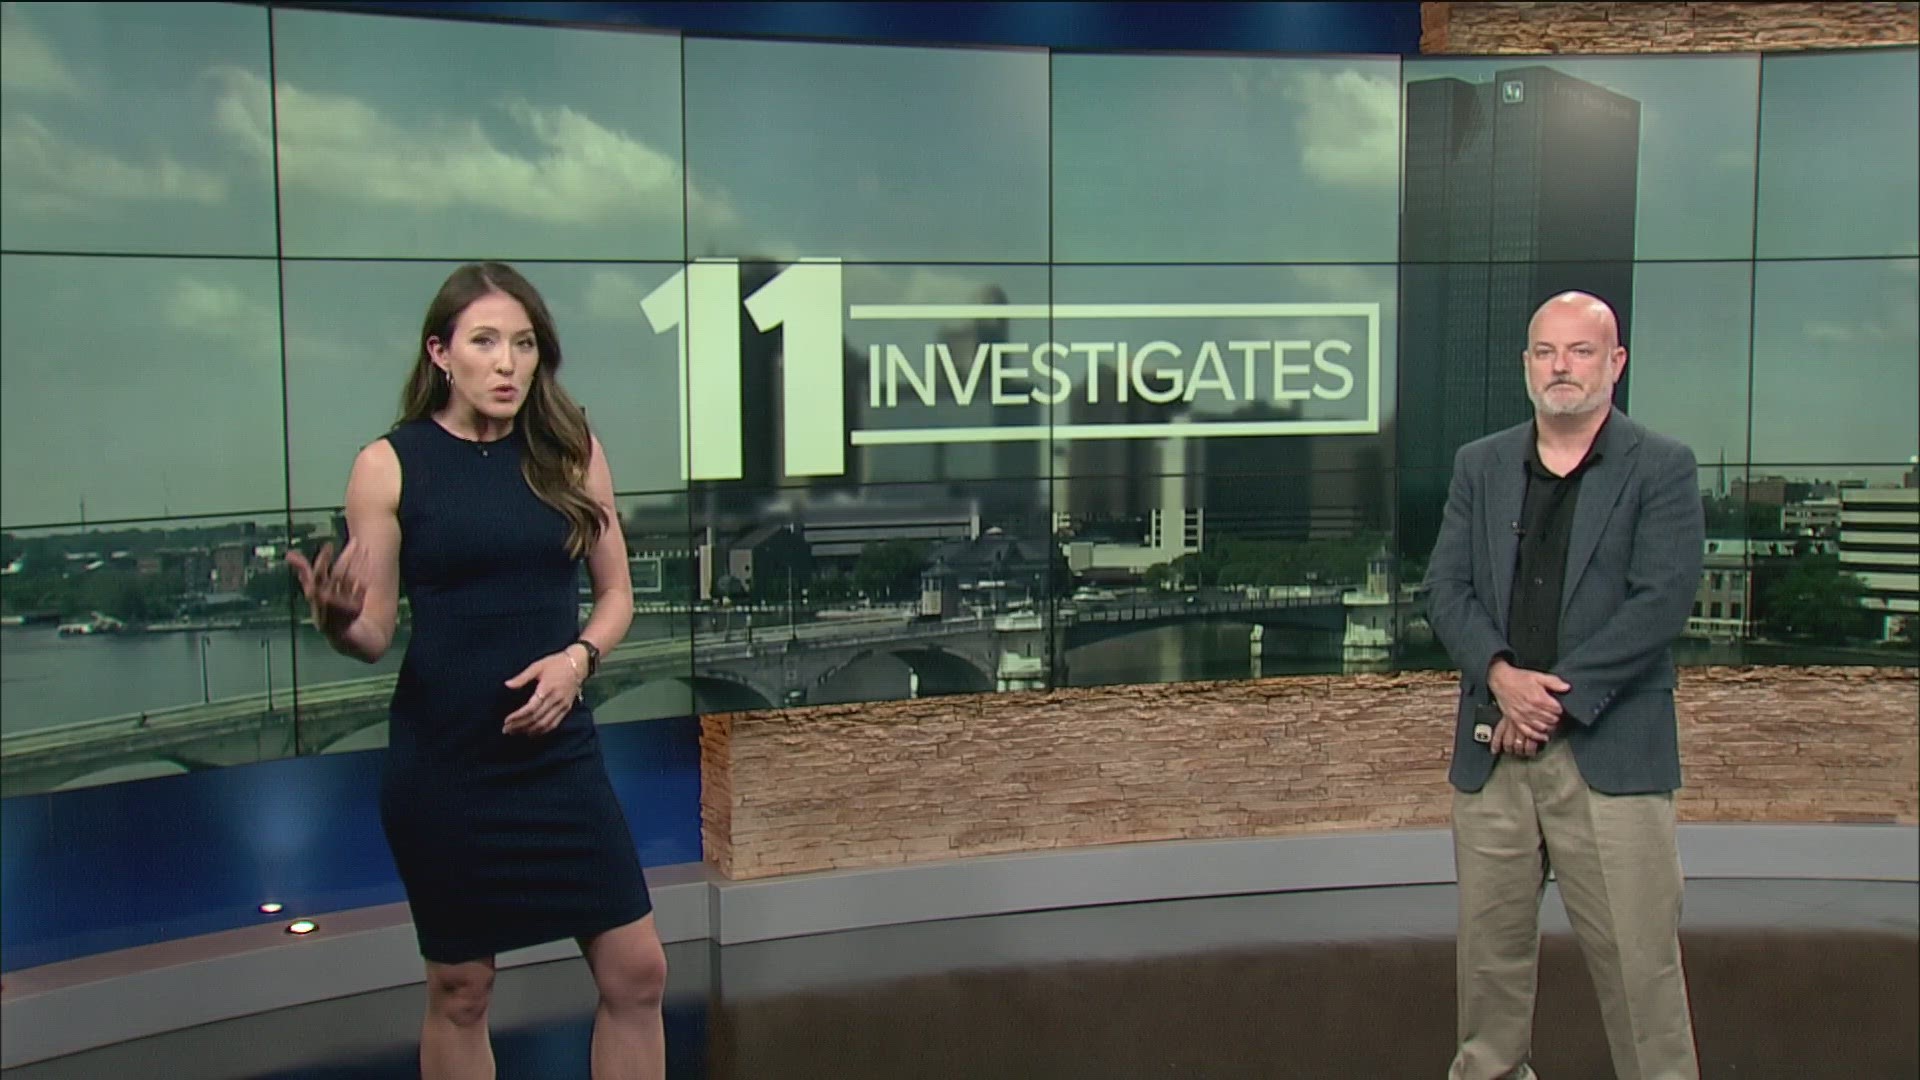 The 11 Investigates is two for two on Call 11 For Action stories. And Brian Dugger is going in a new direction with WTOL 11's Guilty Without Proof series.